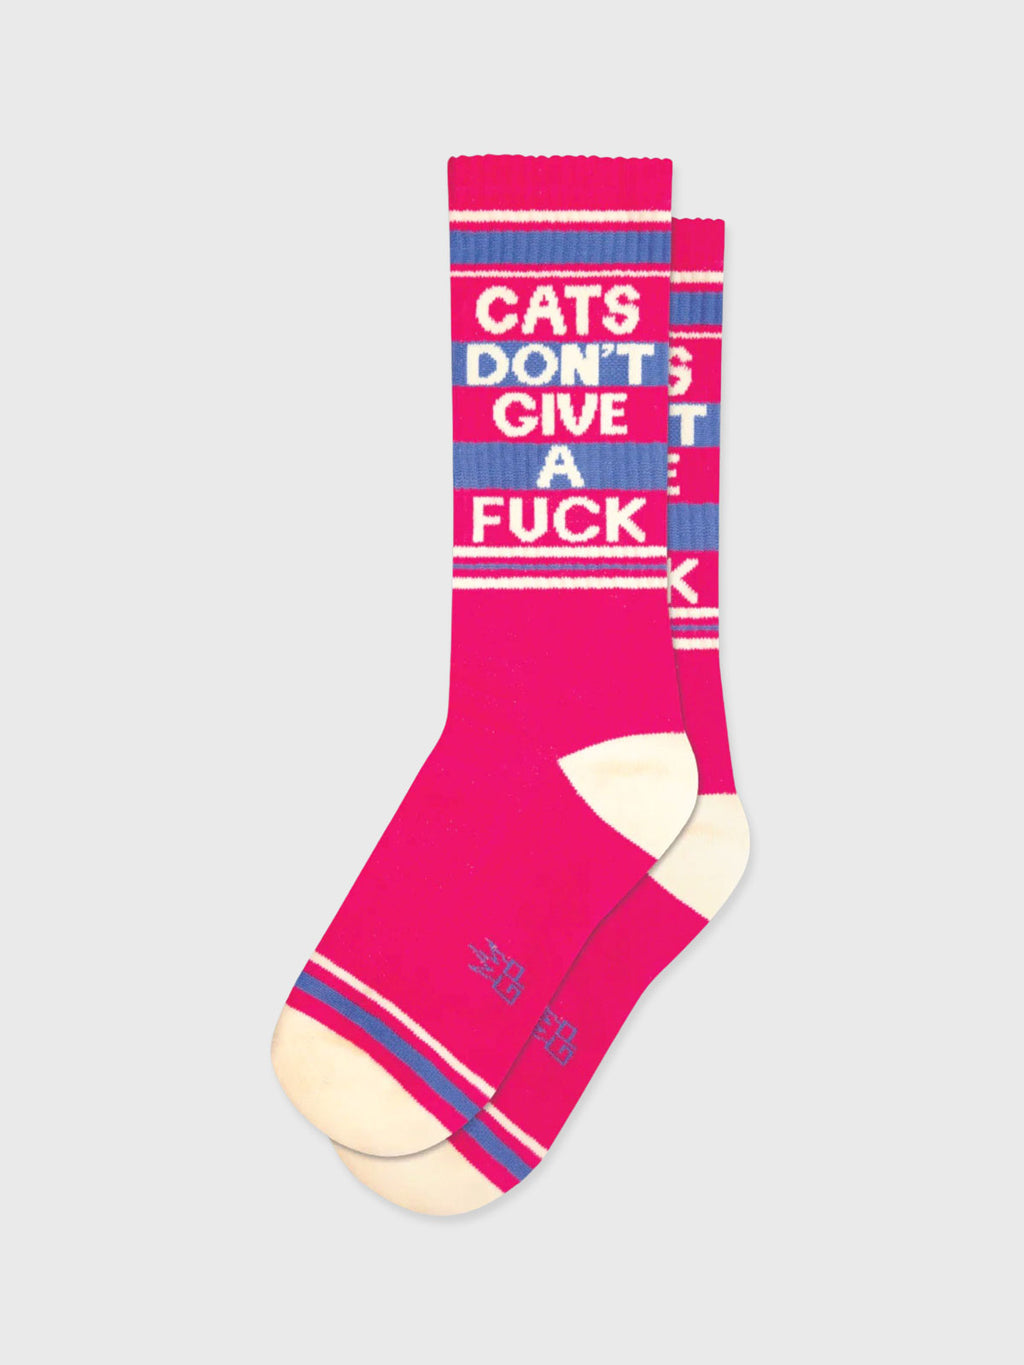 Gumball Poodle - Cats Don't Give A Fuck Socks